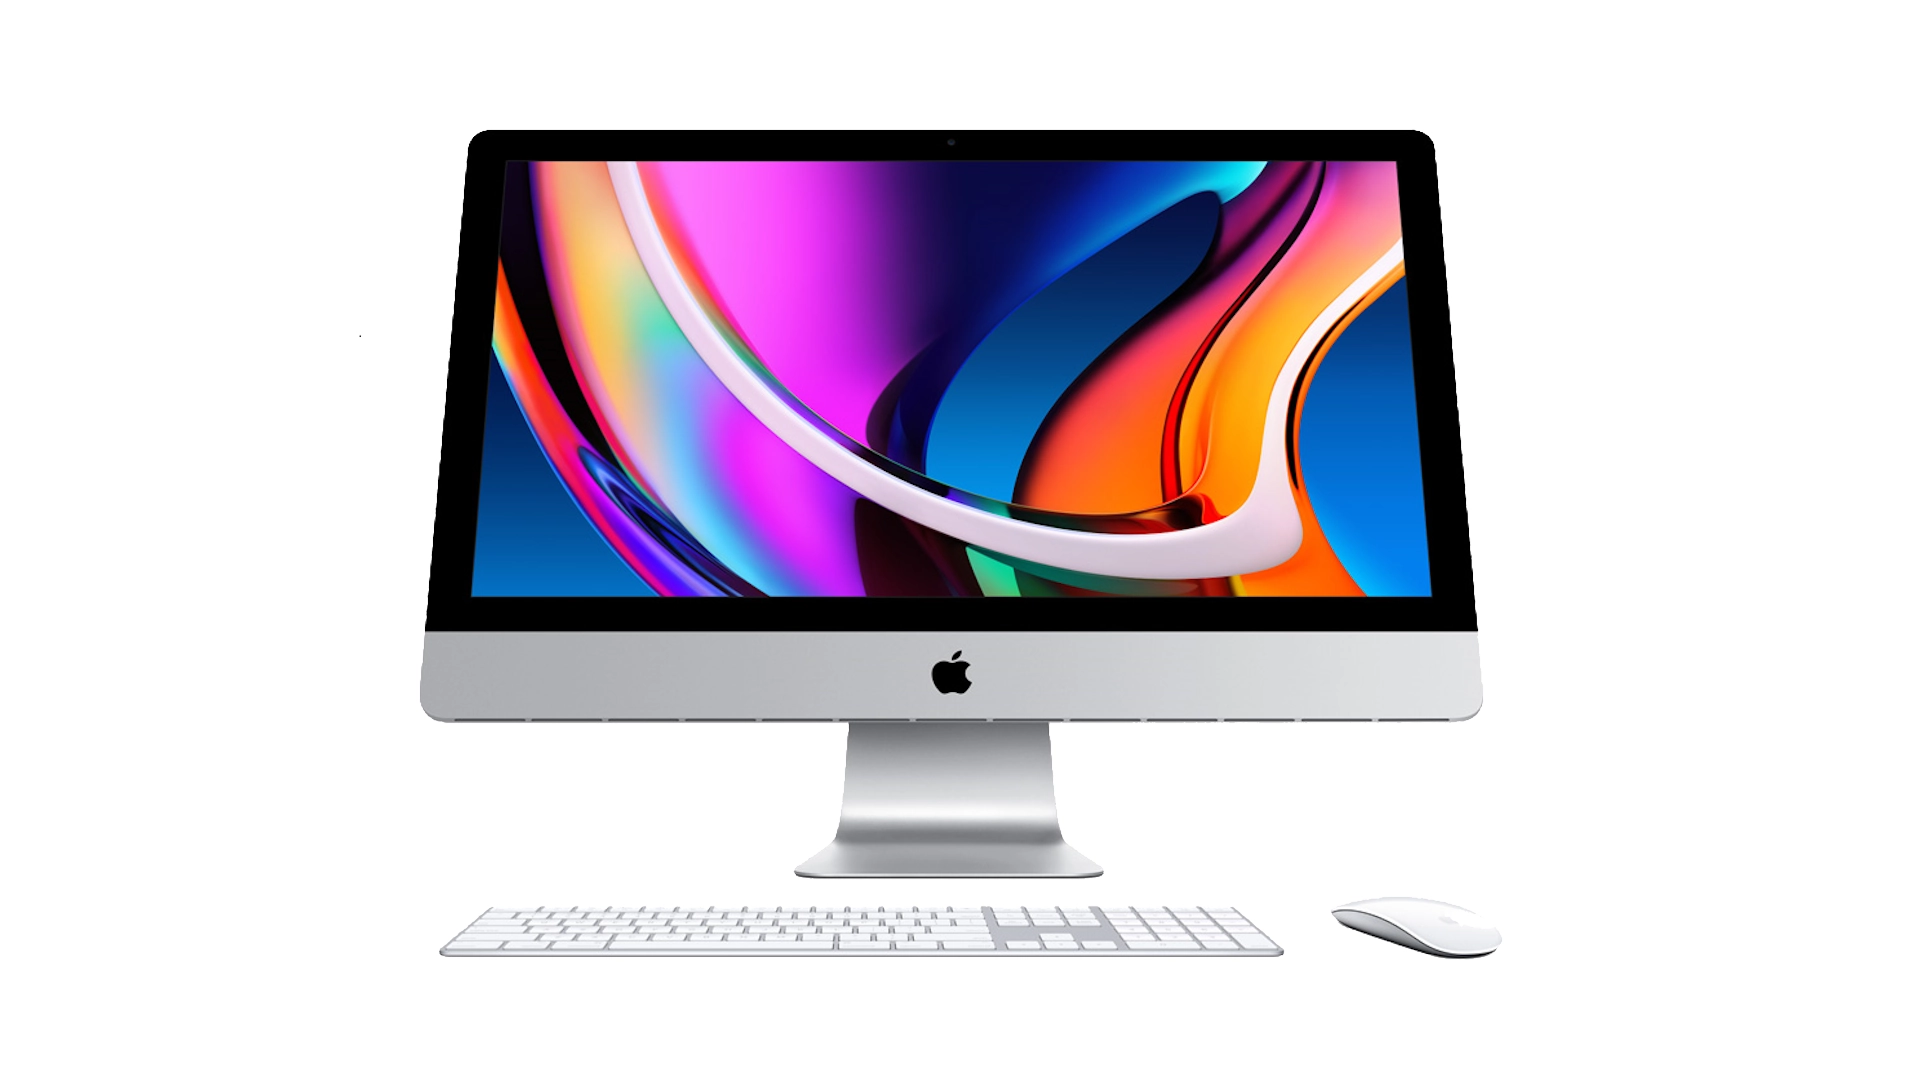 Apple denies rumors about plans for a 27-inch iMac computer with an M chip